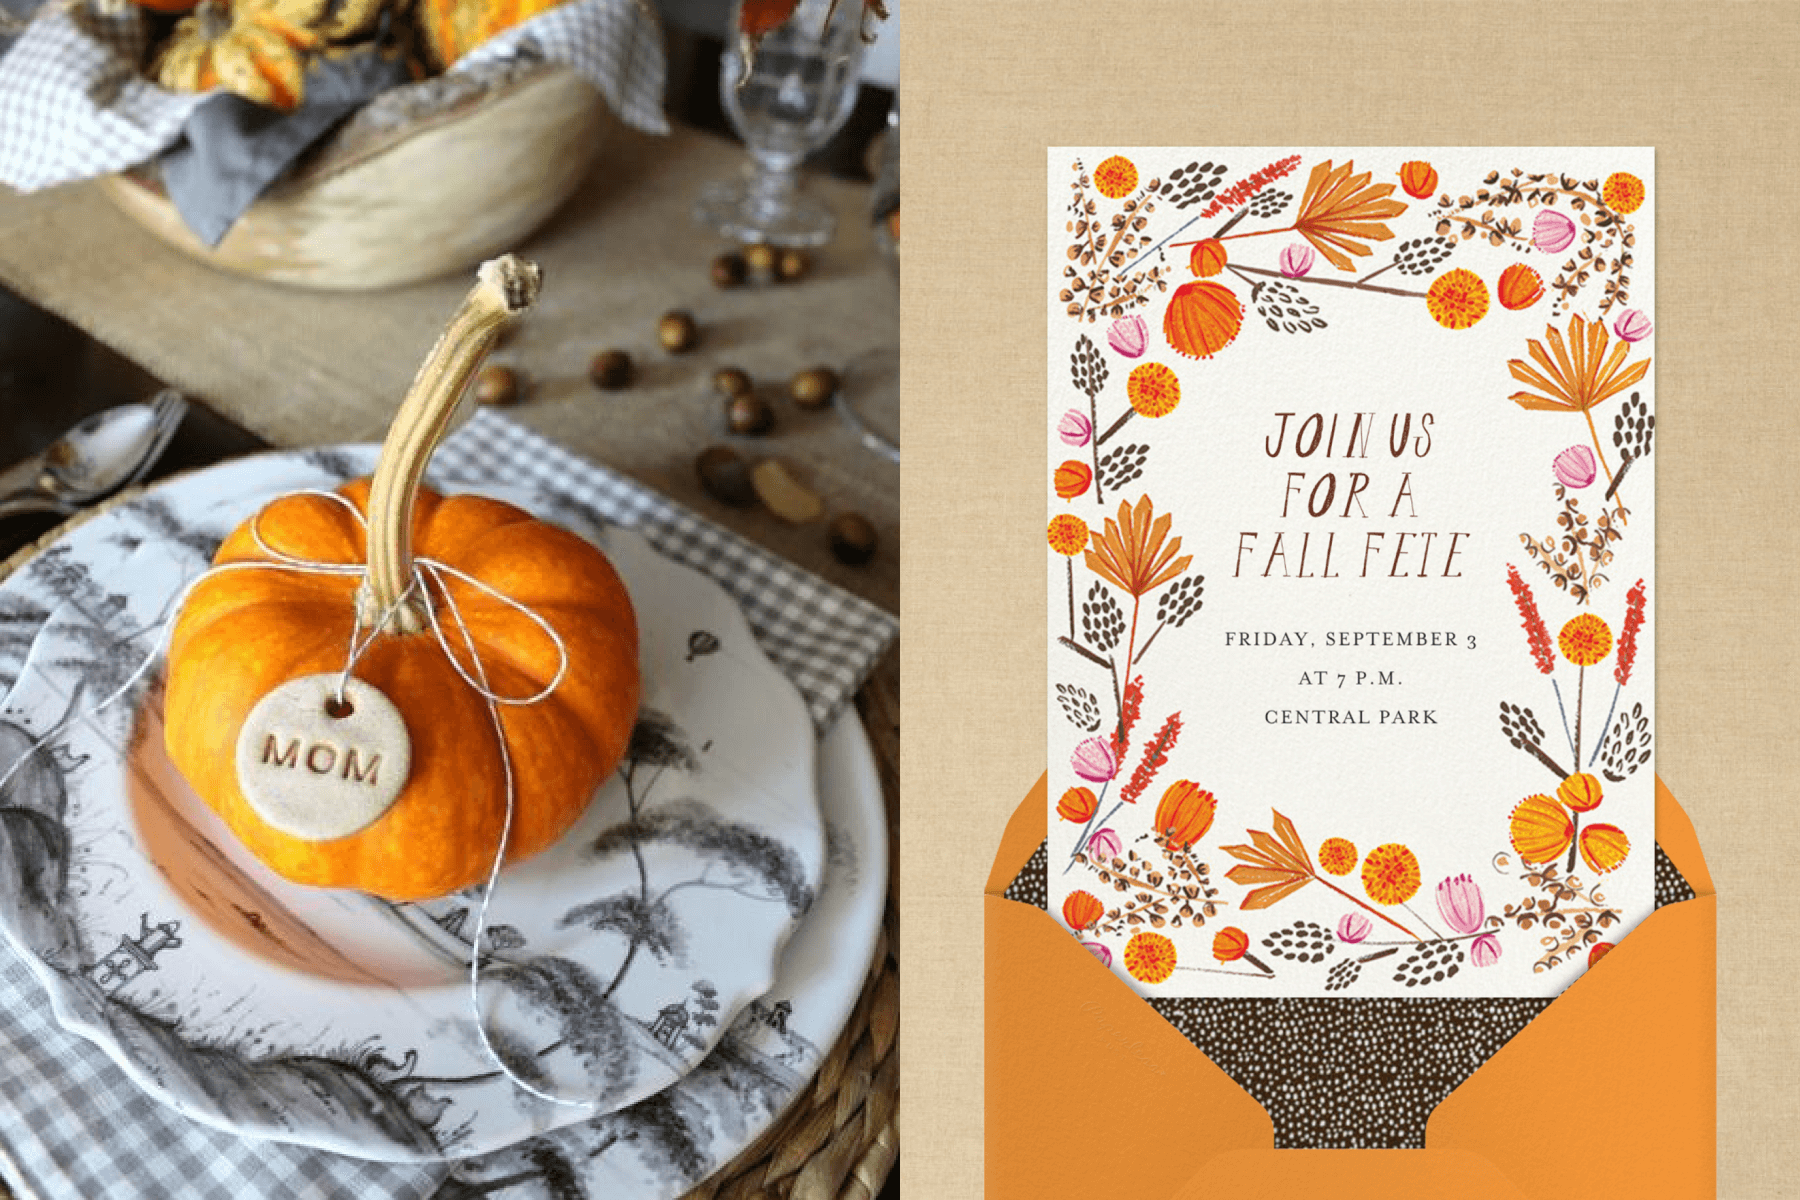 Left: A close up photo of a small pumpkin on a table setting with a round place marker reading “Mom.” Right: A fall invitation with an orange, pink, and brown flower border.